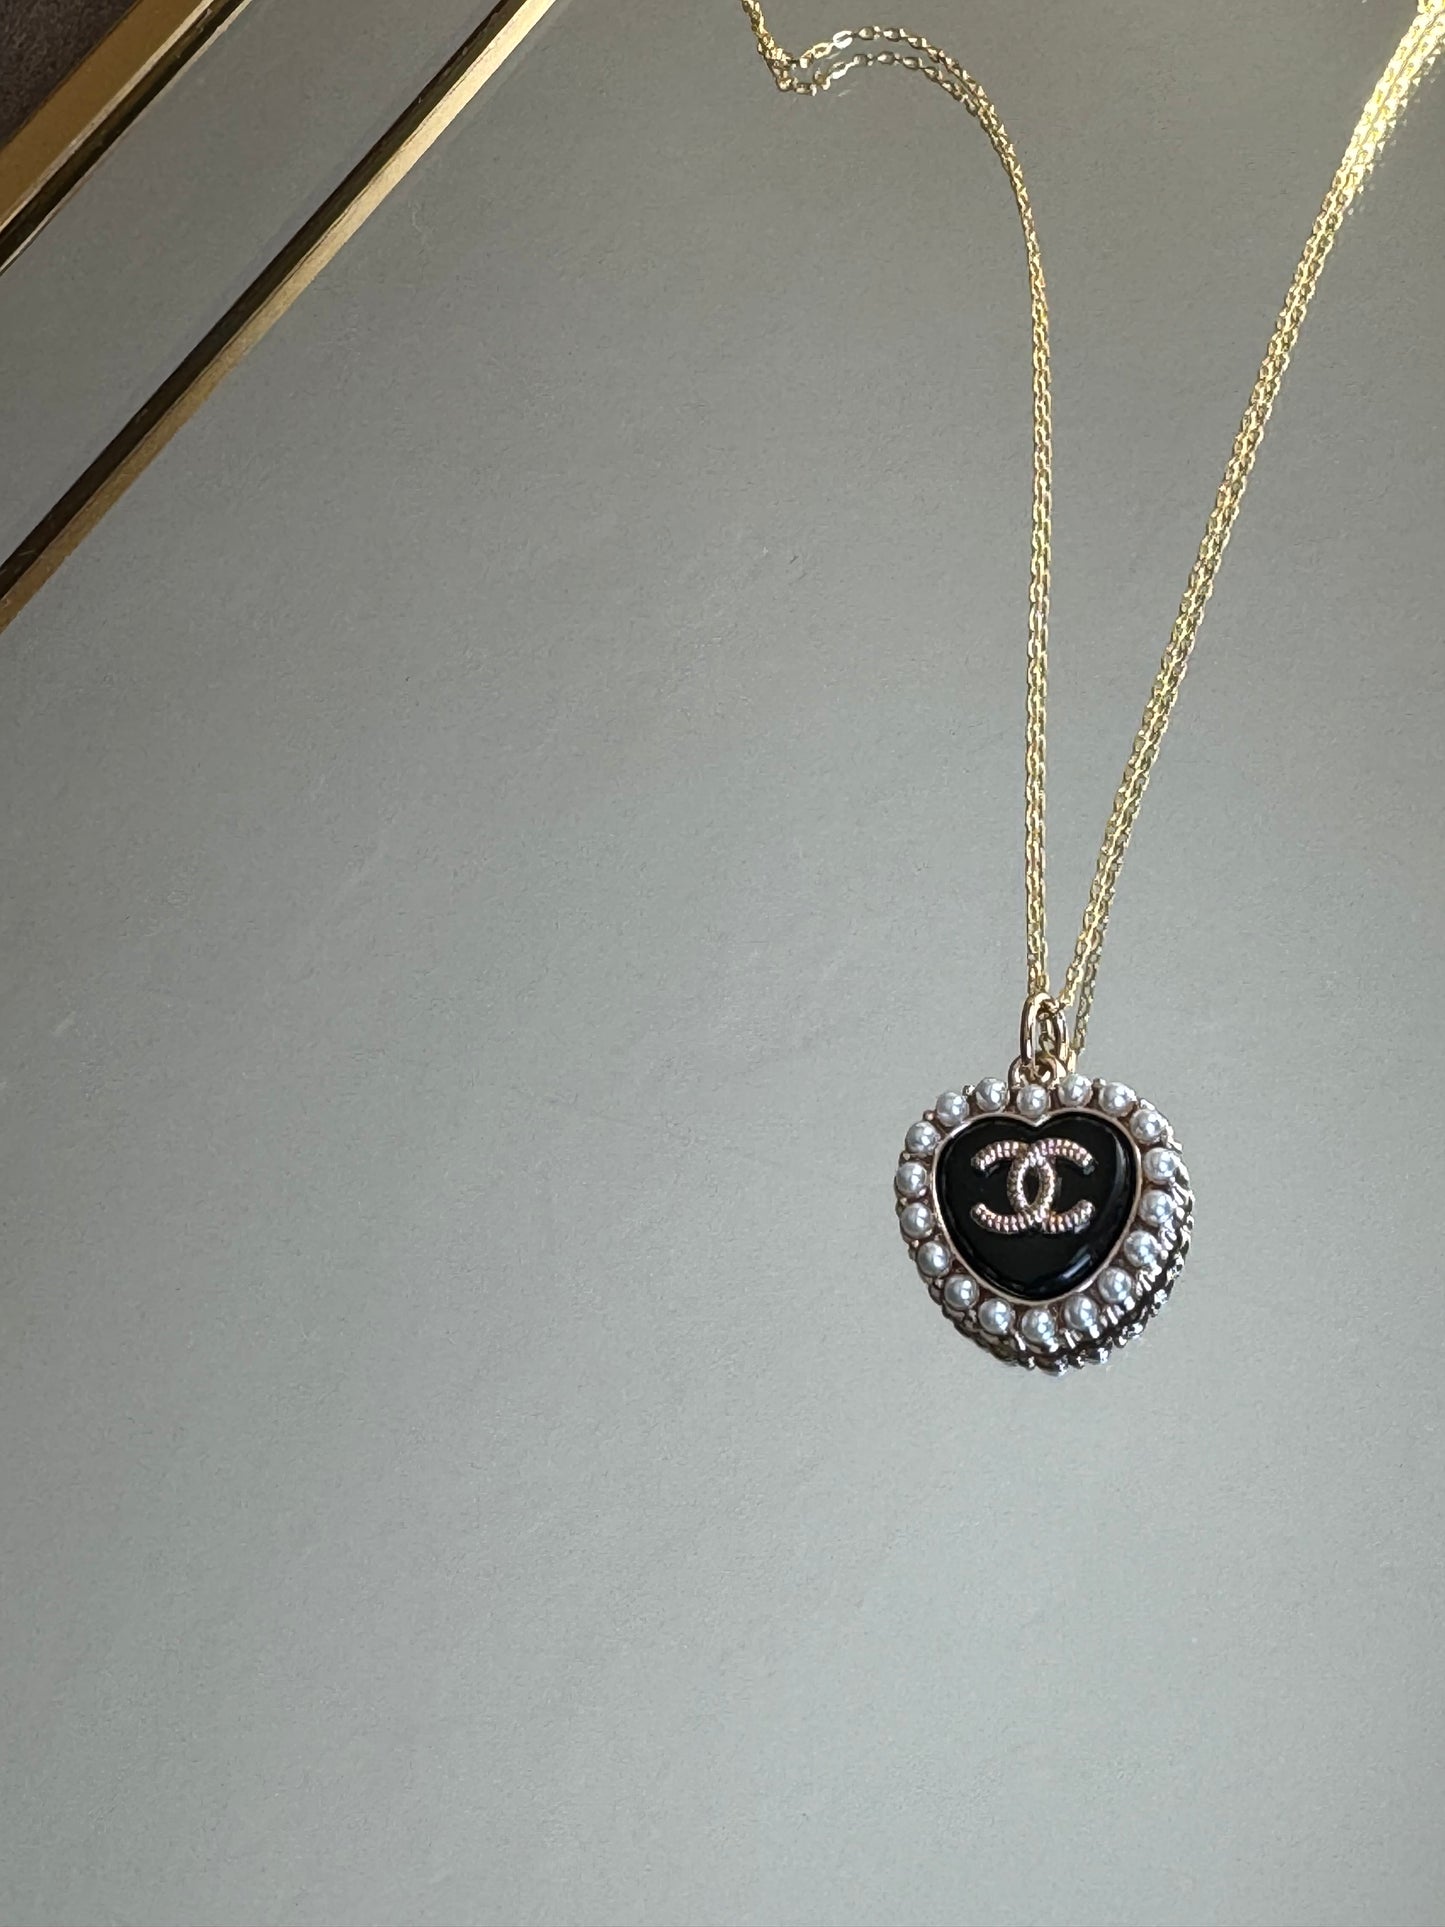 Repurposed Black & Faux Pearl Chanel Necklace